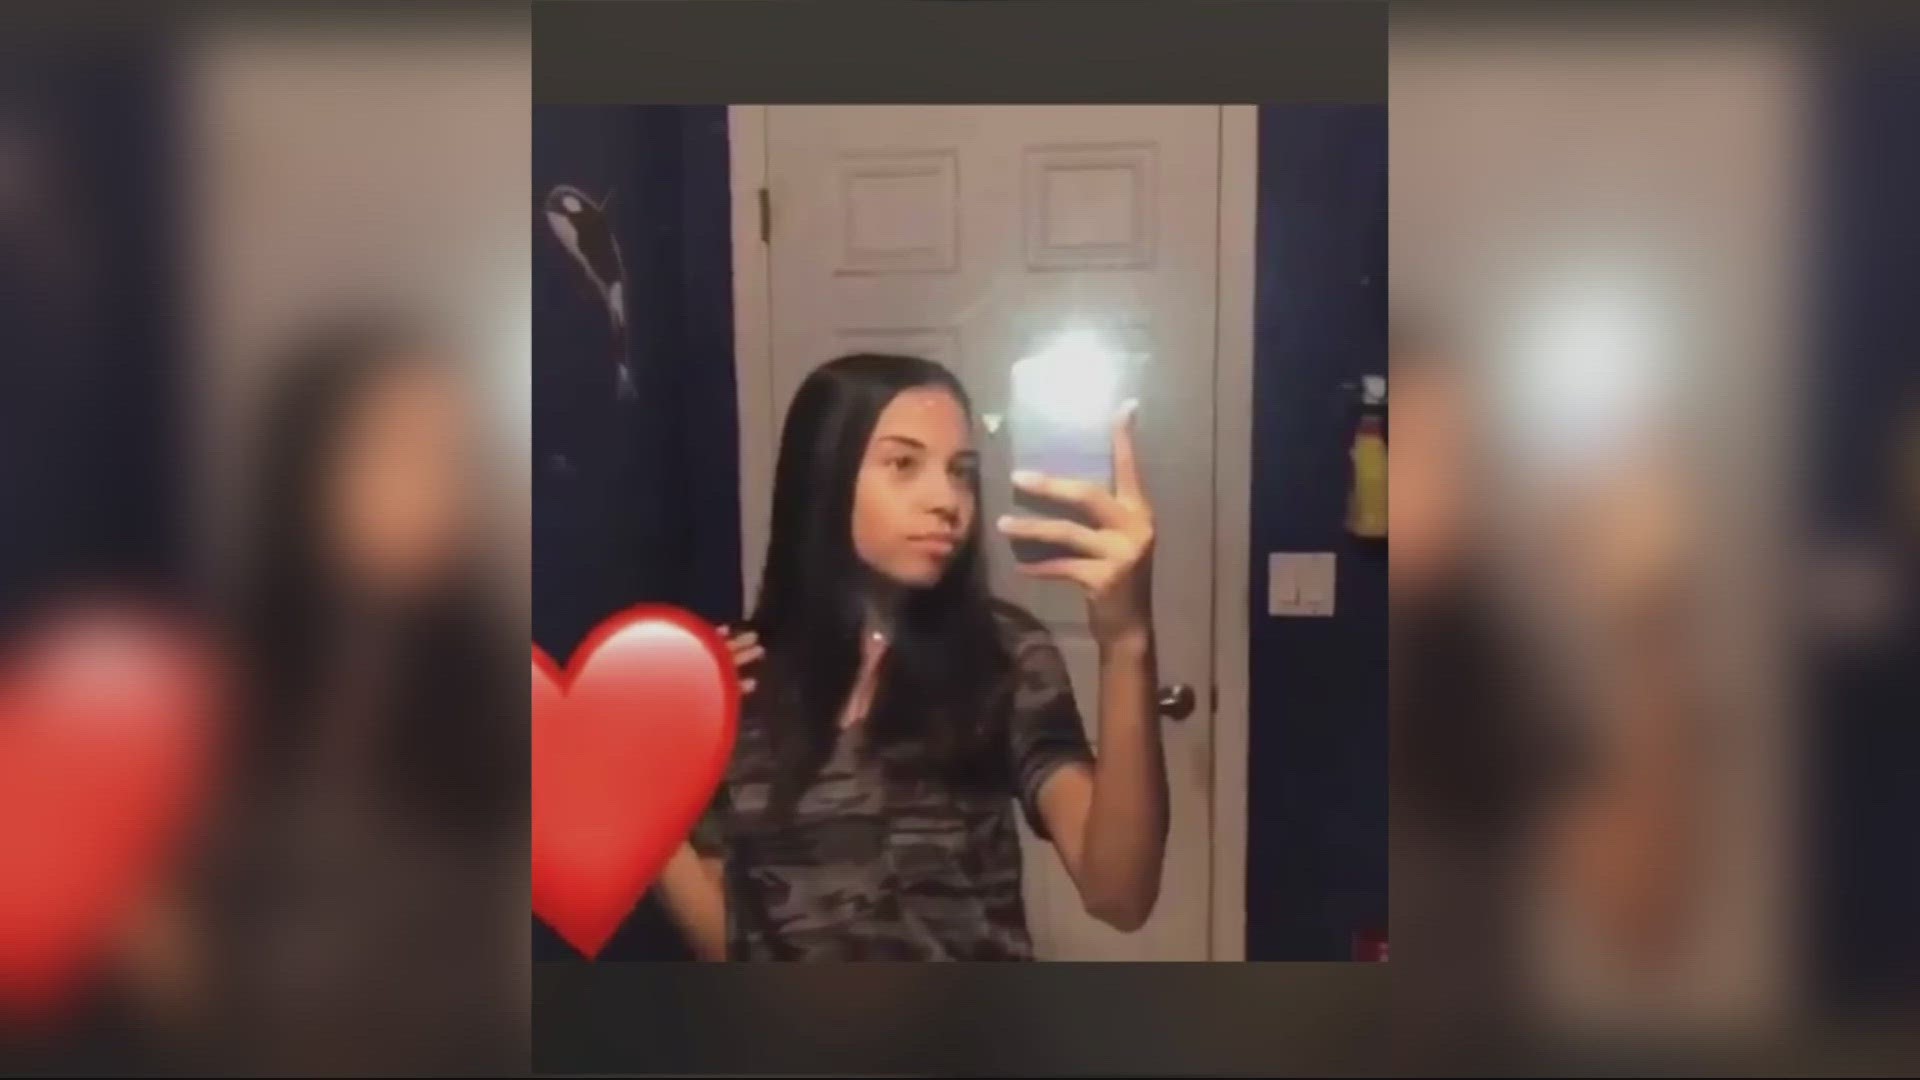 Ayana Belton was 16-years old when she was stabbed to death by her boyfriend in March of 2020. Over a year later 13-year-old Tristyn Bailey was fatally stabbed.